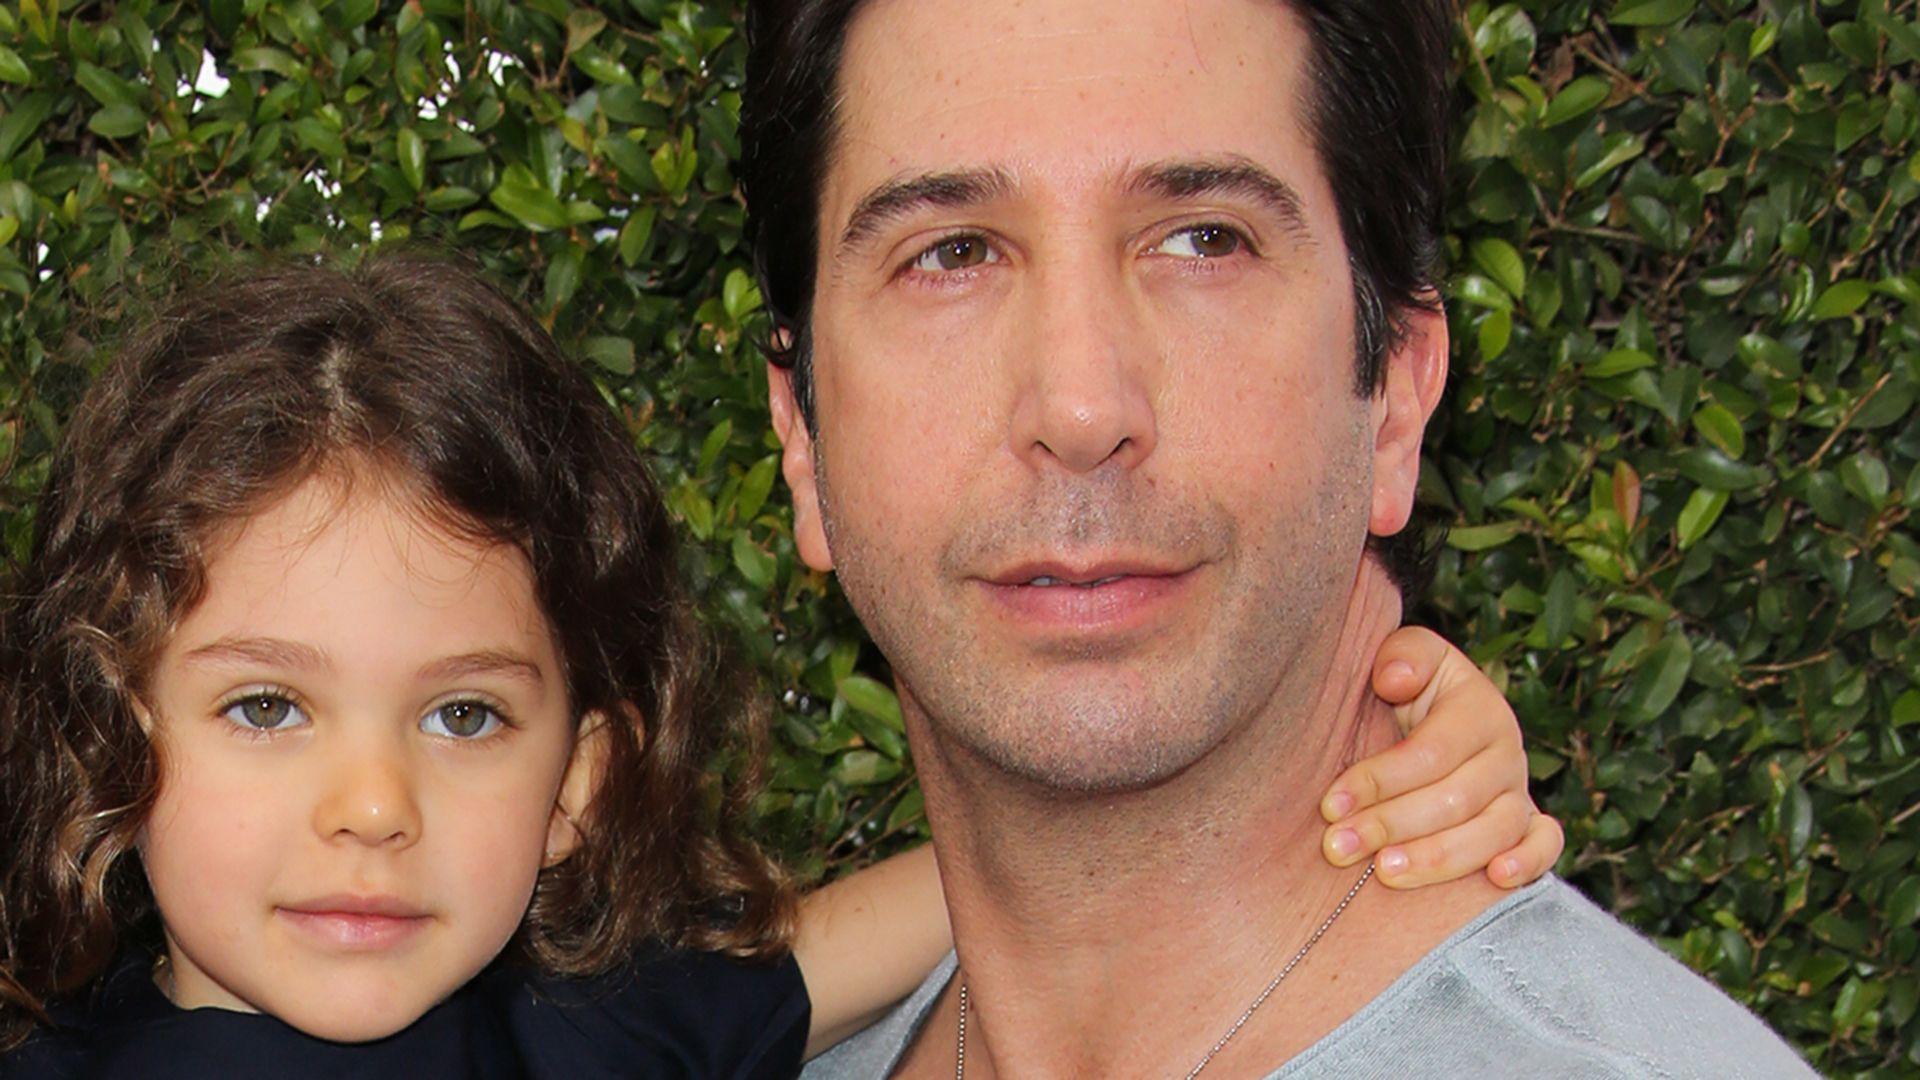 David Schwimmer shares his 'no shame' parenting approach